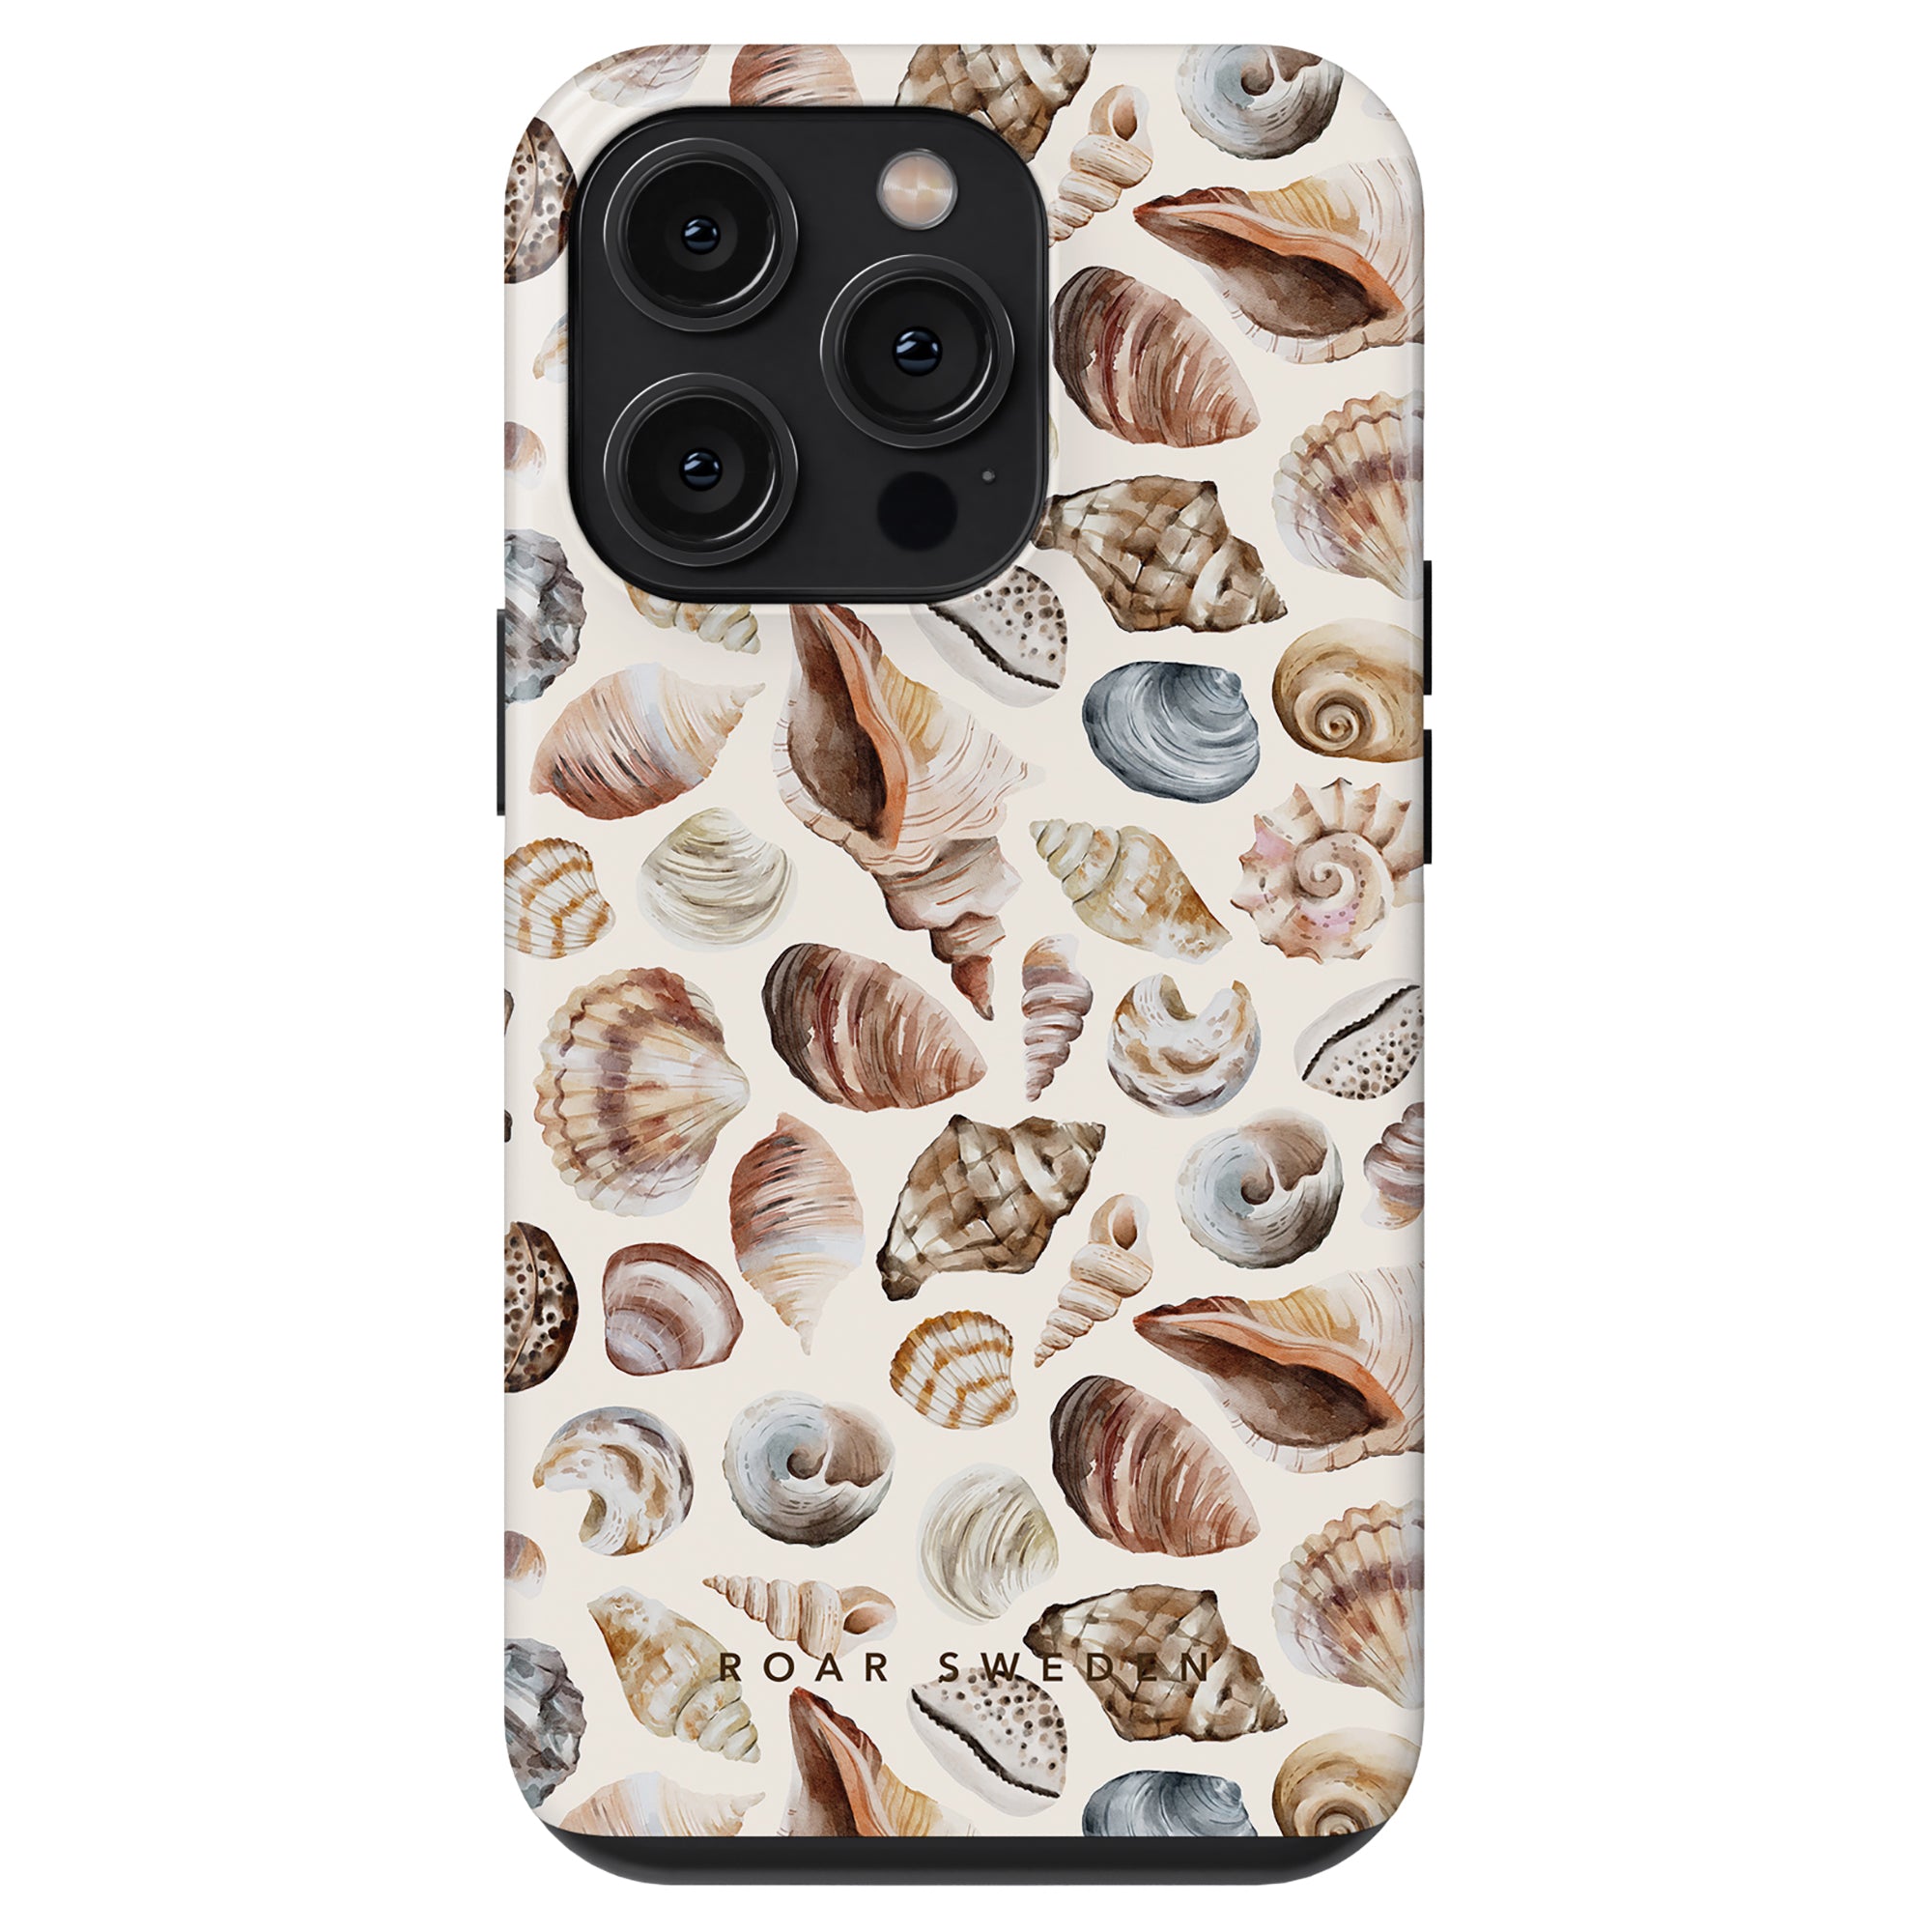 Phone case with Beach Shells - Tough Case design from the ocean collection.